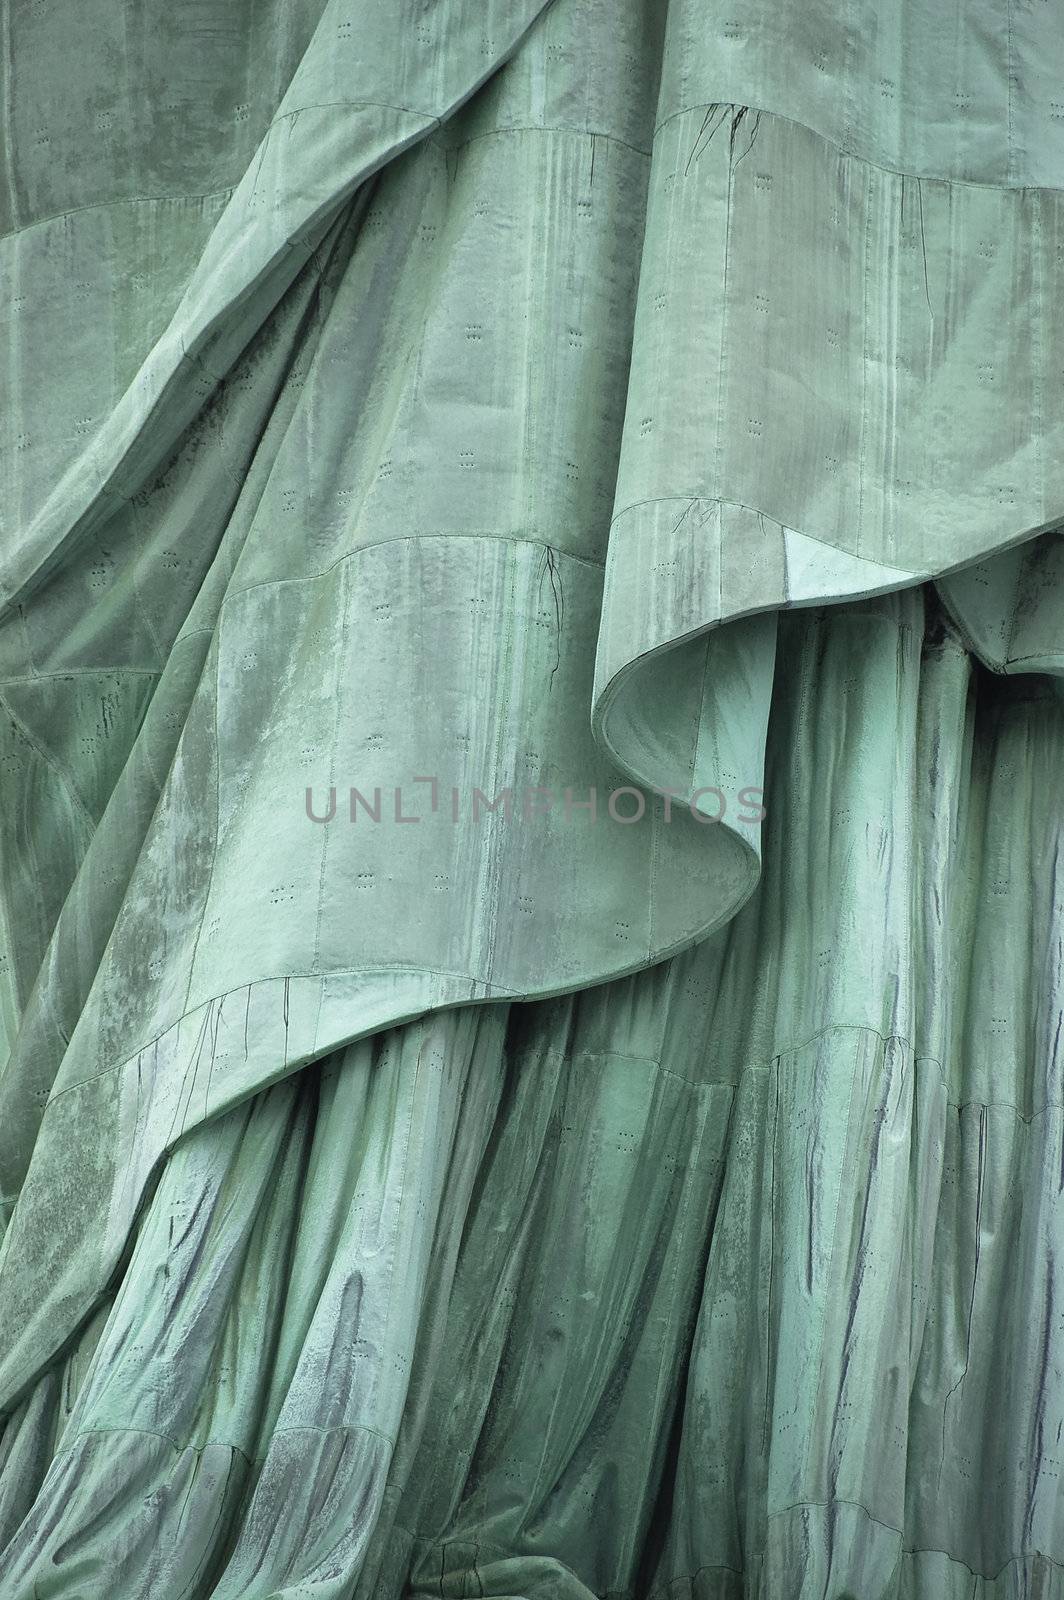 Statue of Liberty's Robe by ralarcon